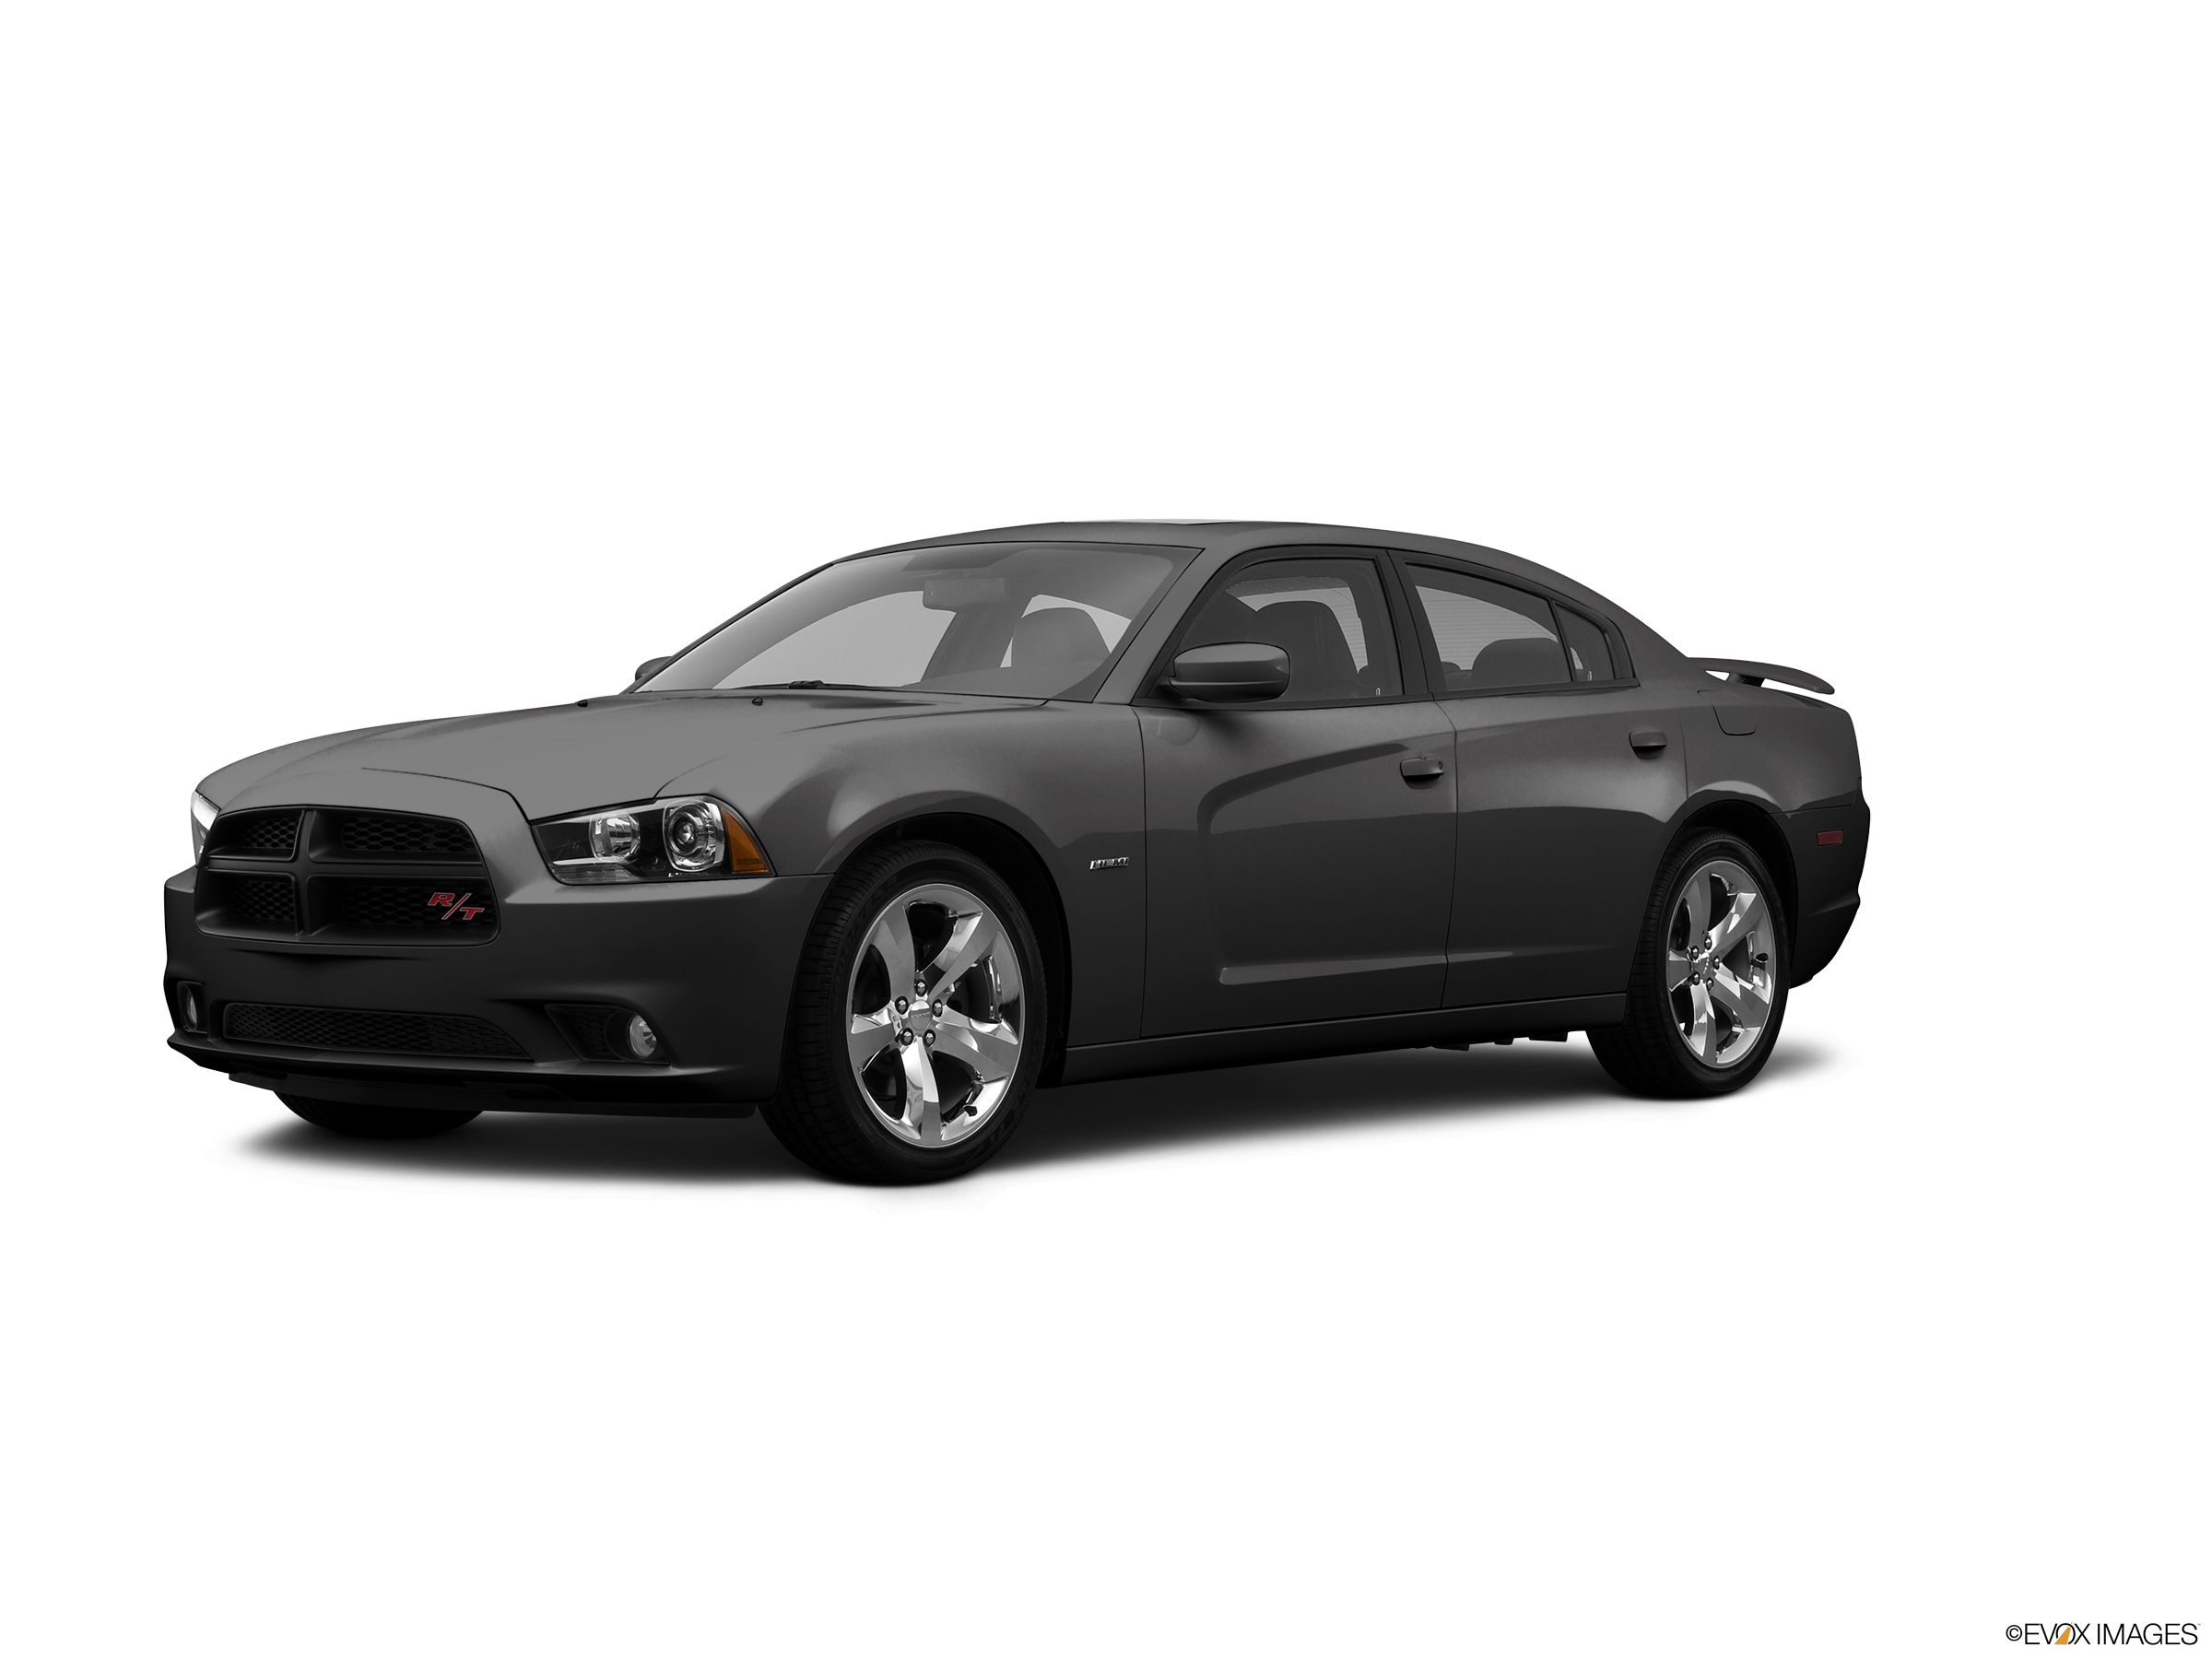 Used 2013 Dodge Charger R/T Sedan 4D Prices | Kelley Blue Book